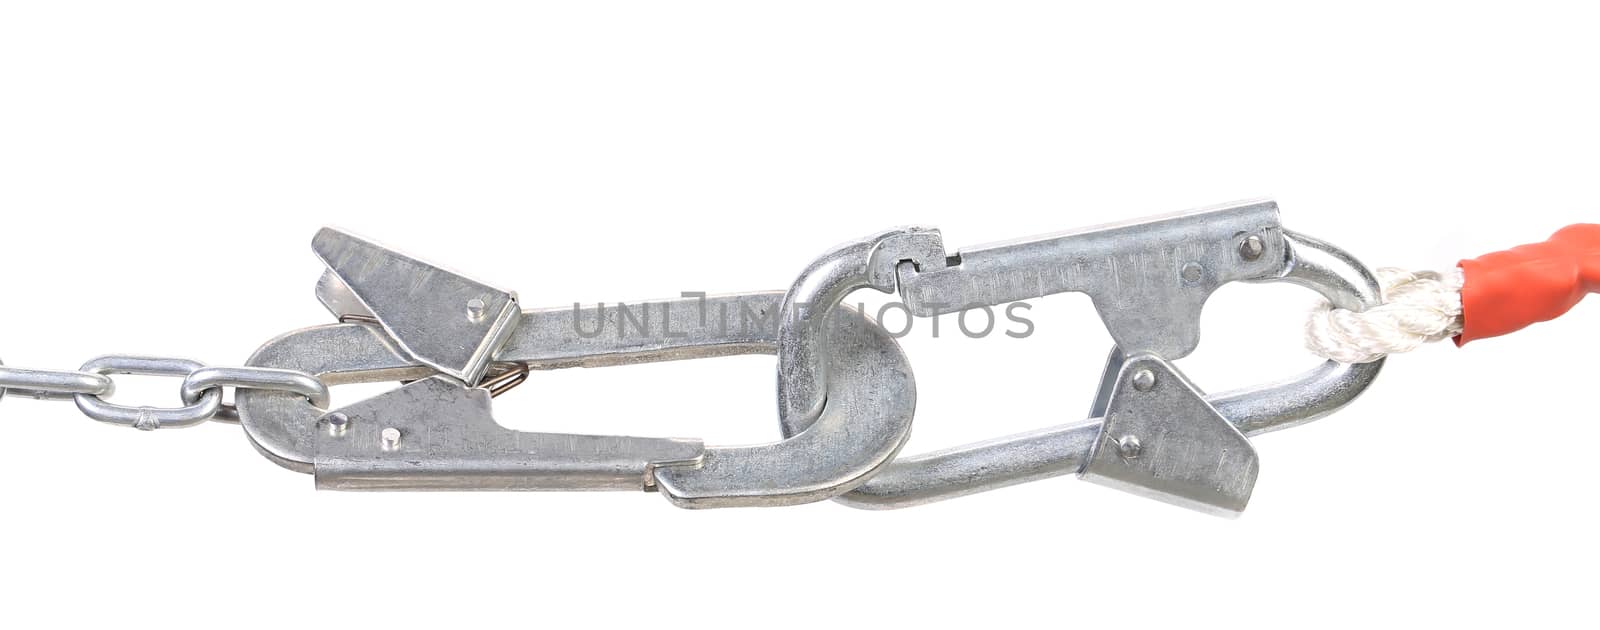 Carbine on chain clasped. Isolated on a white background.